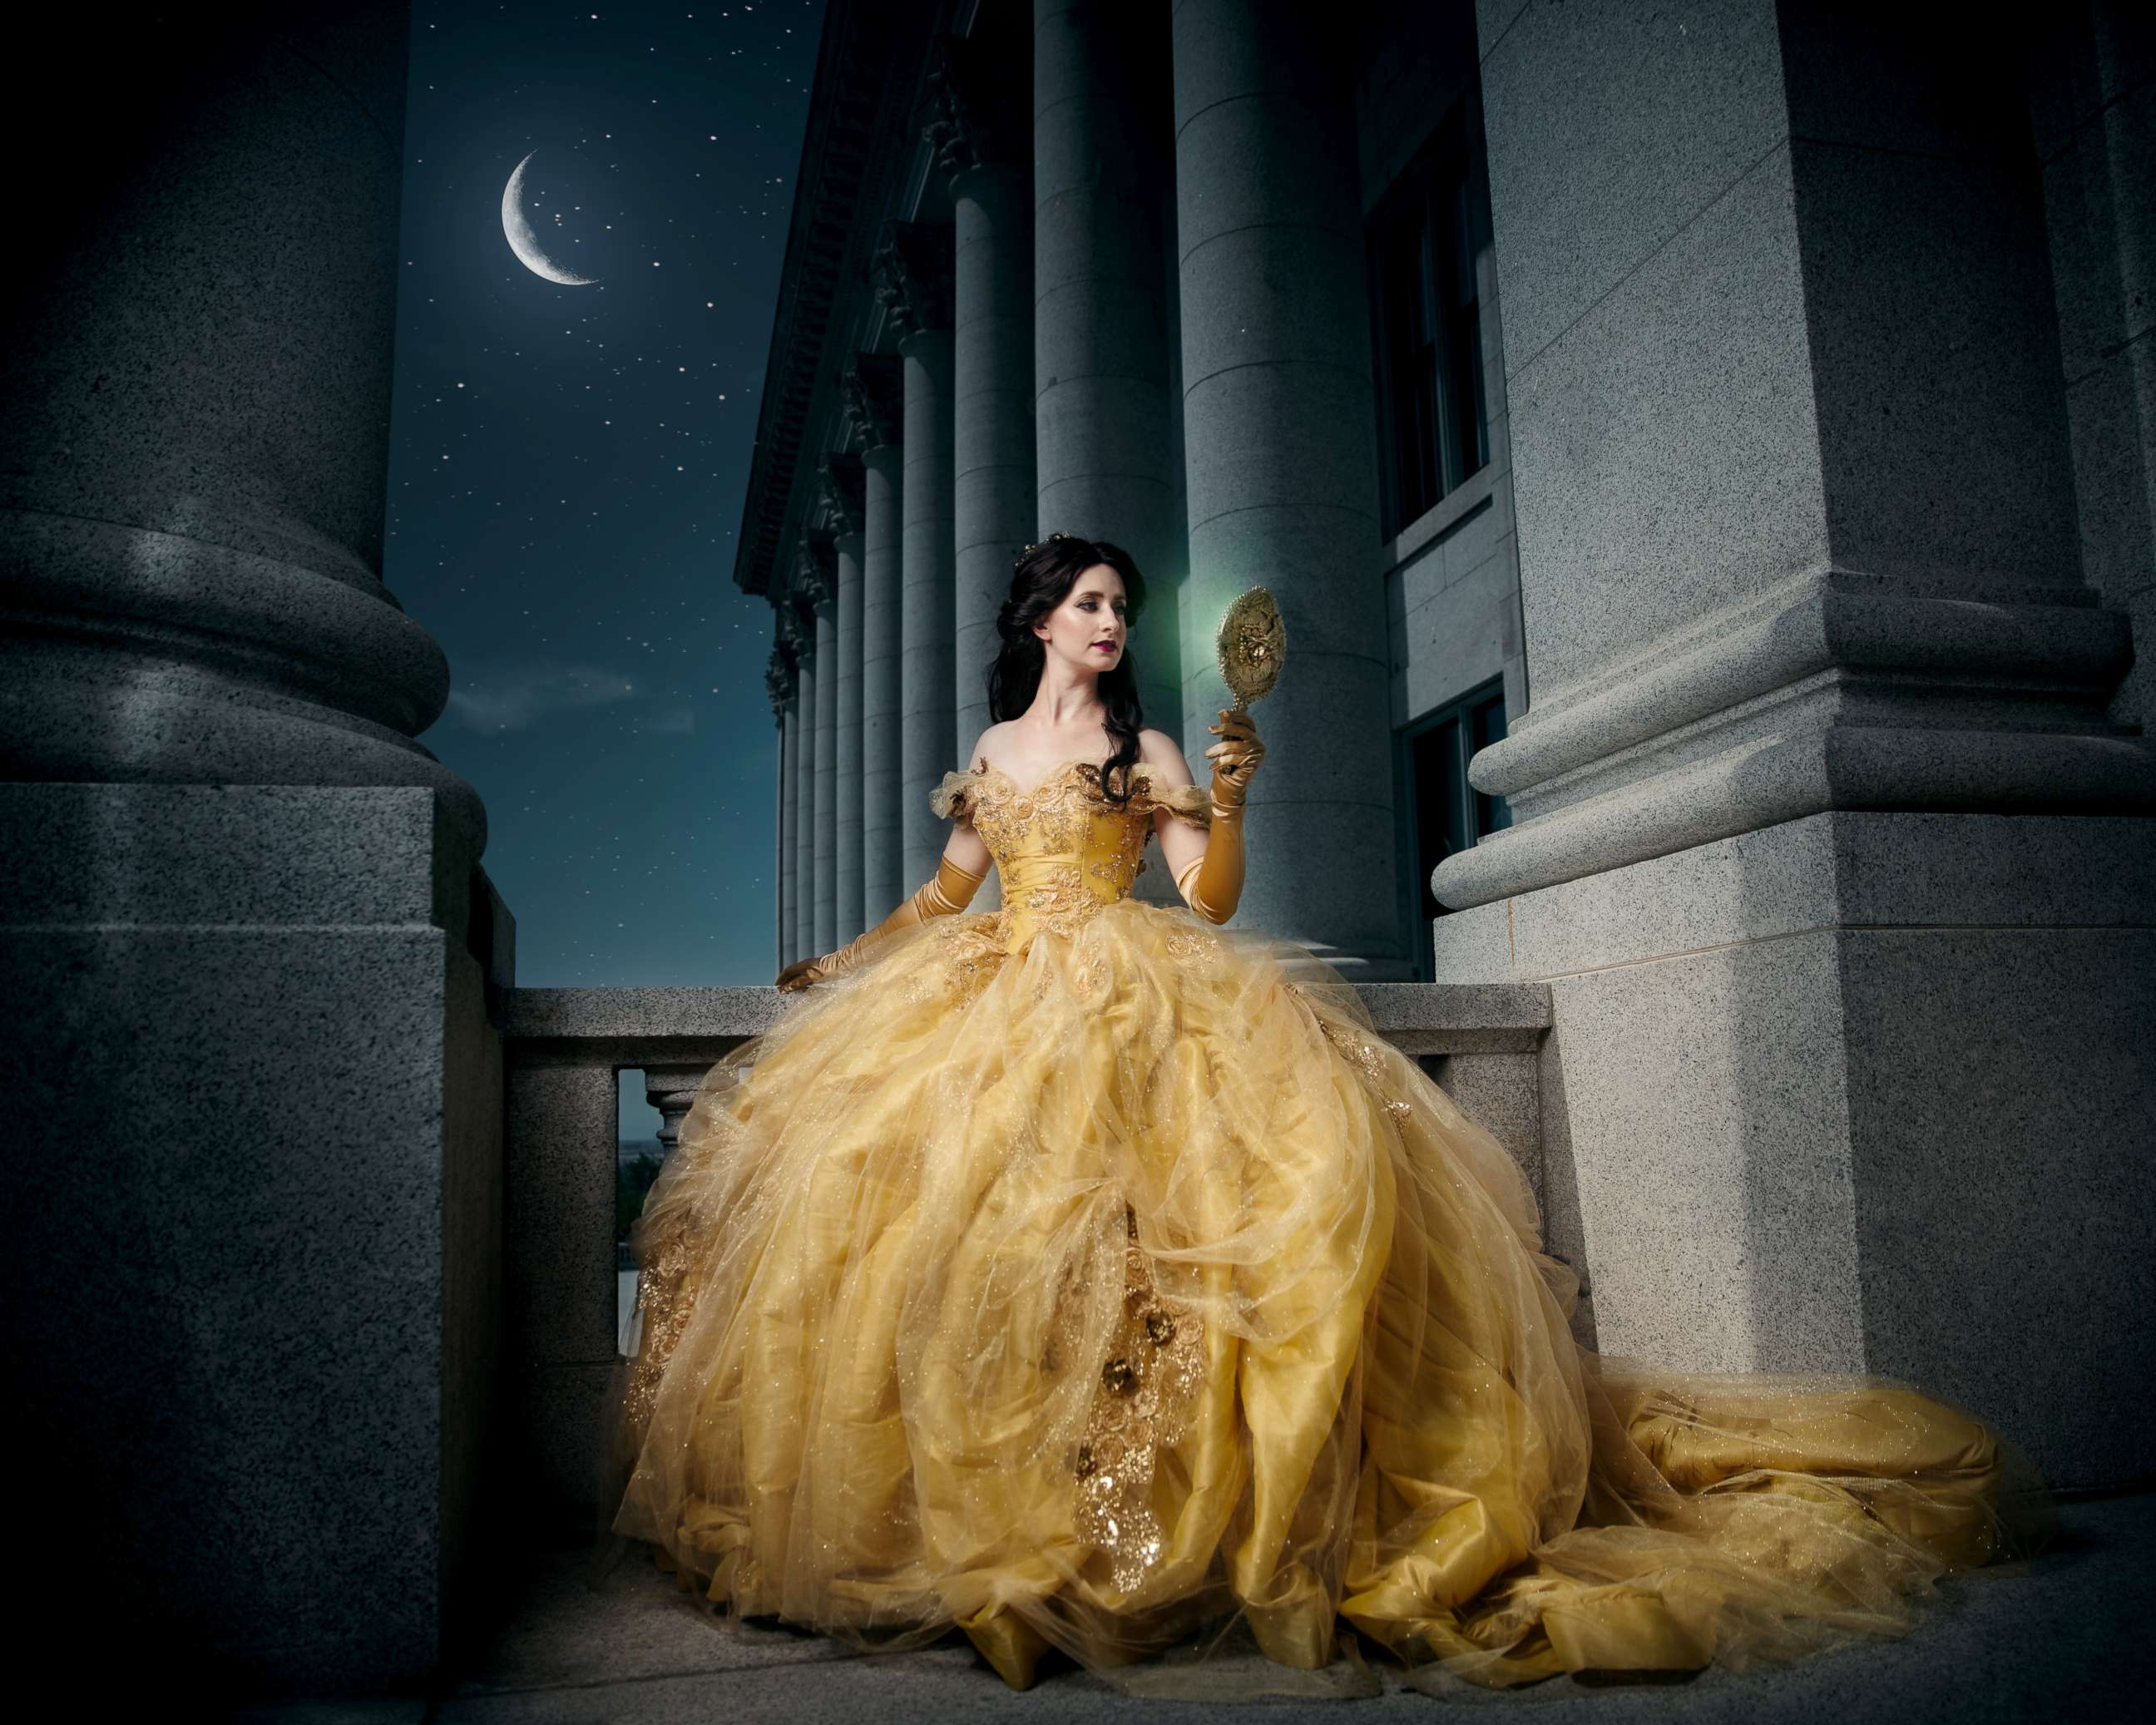 PHOTO: Bethanie Garcia poses as Belle from Disney's "Beauty and the Beast" in a photo shoot conceptualized by designer Nephi Garcia and photographer Tony Ross.